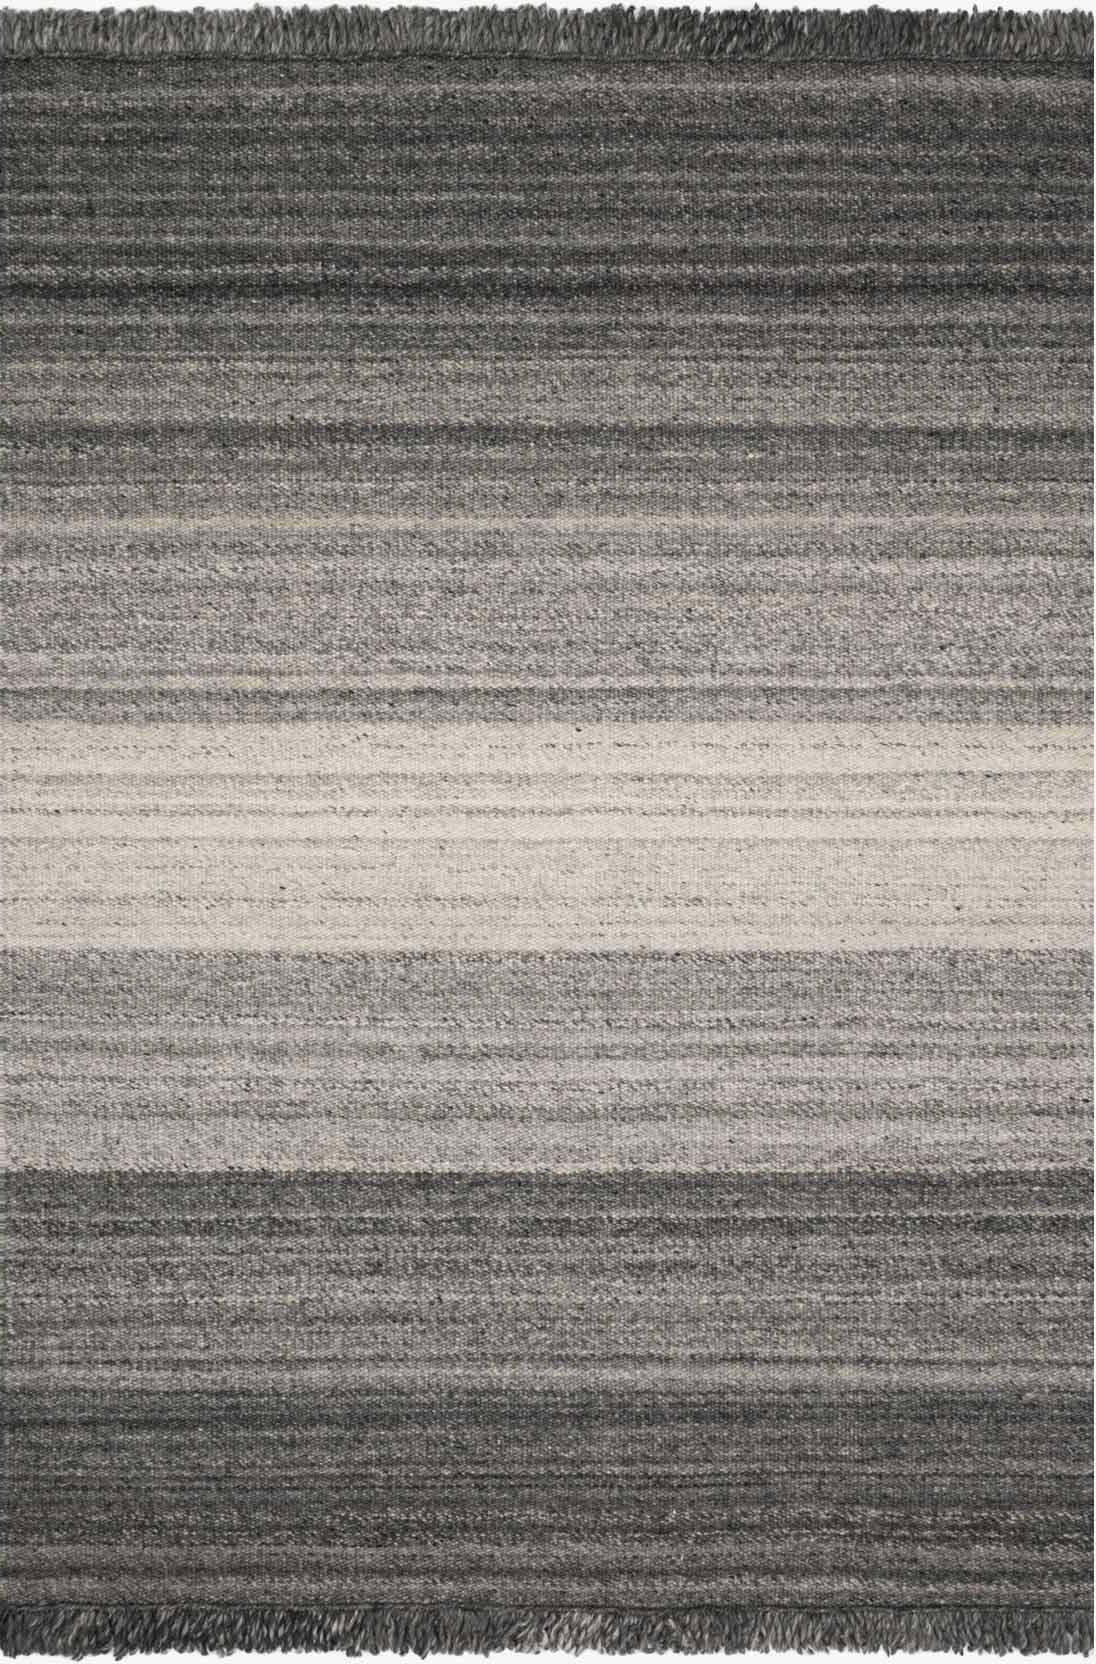 Hand Made Wool Grey Contemporary > Solid/Tone on Tone India Rug 7'9" x 9'9"